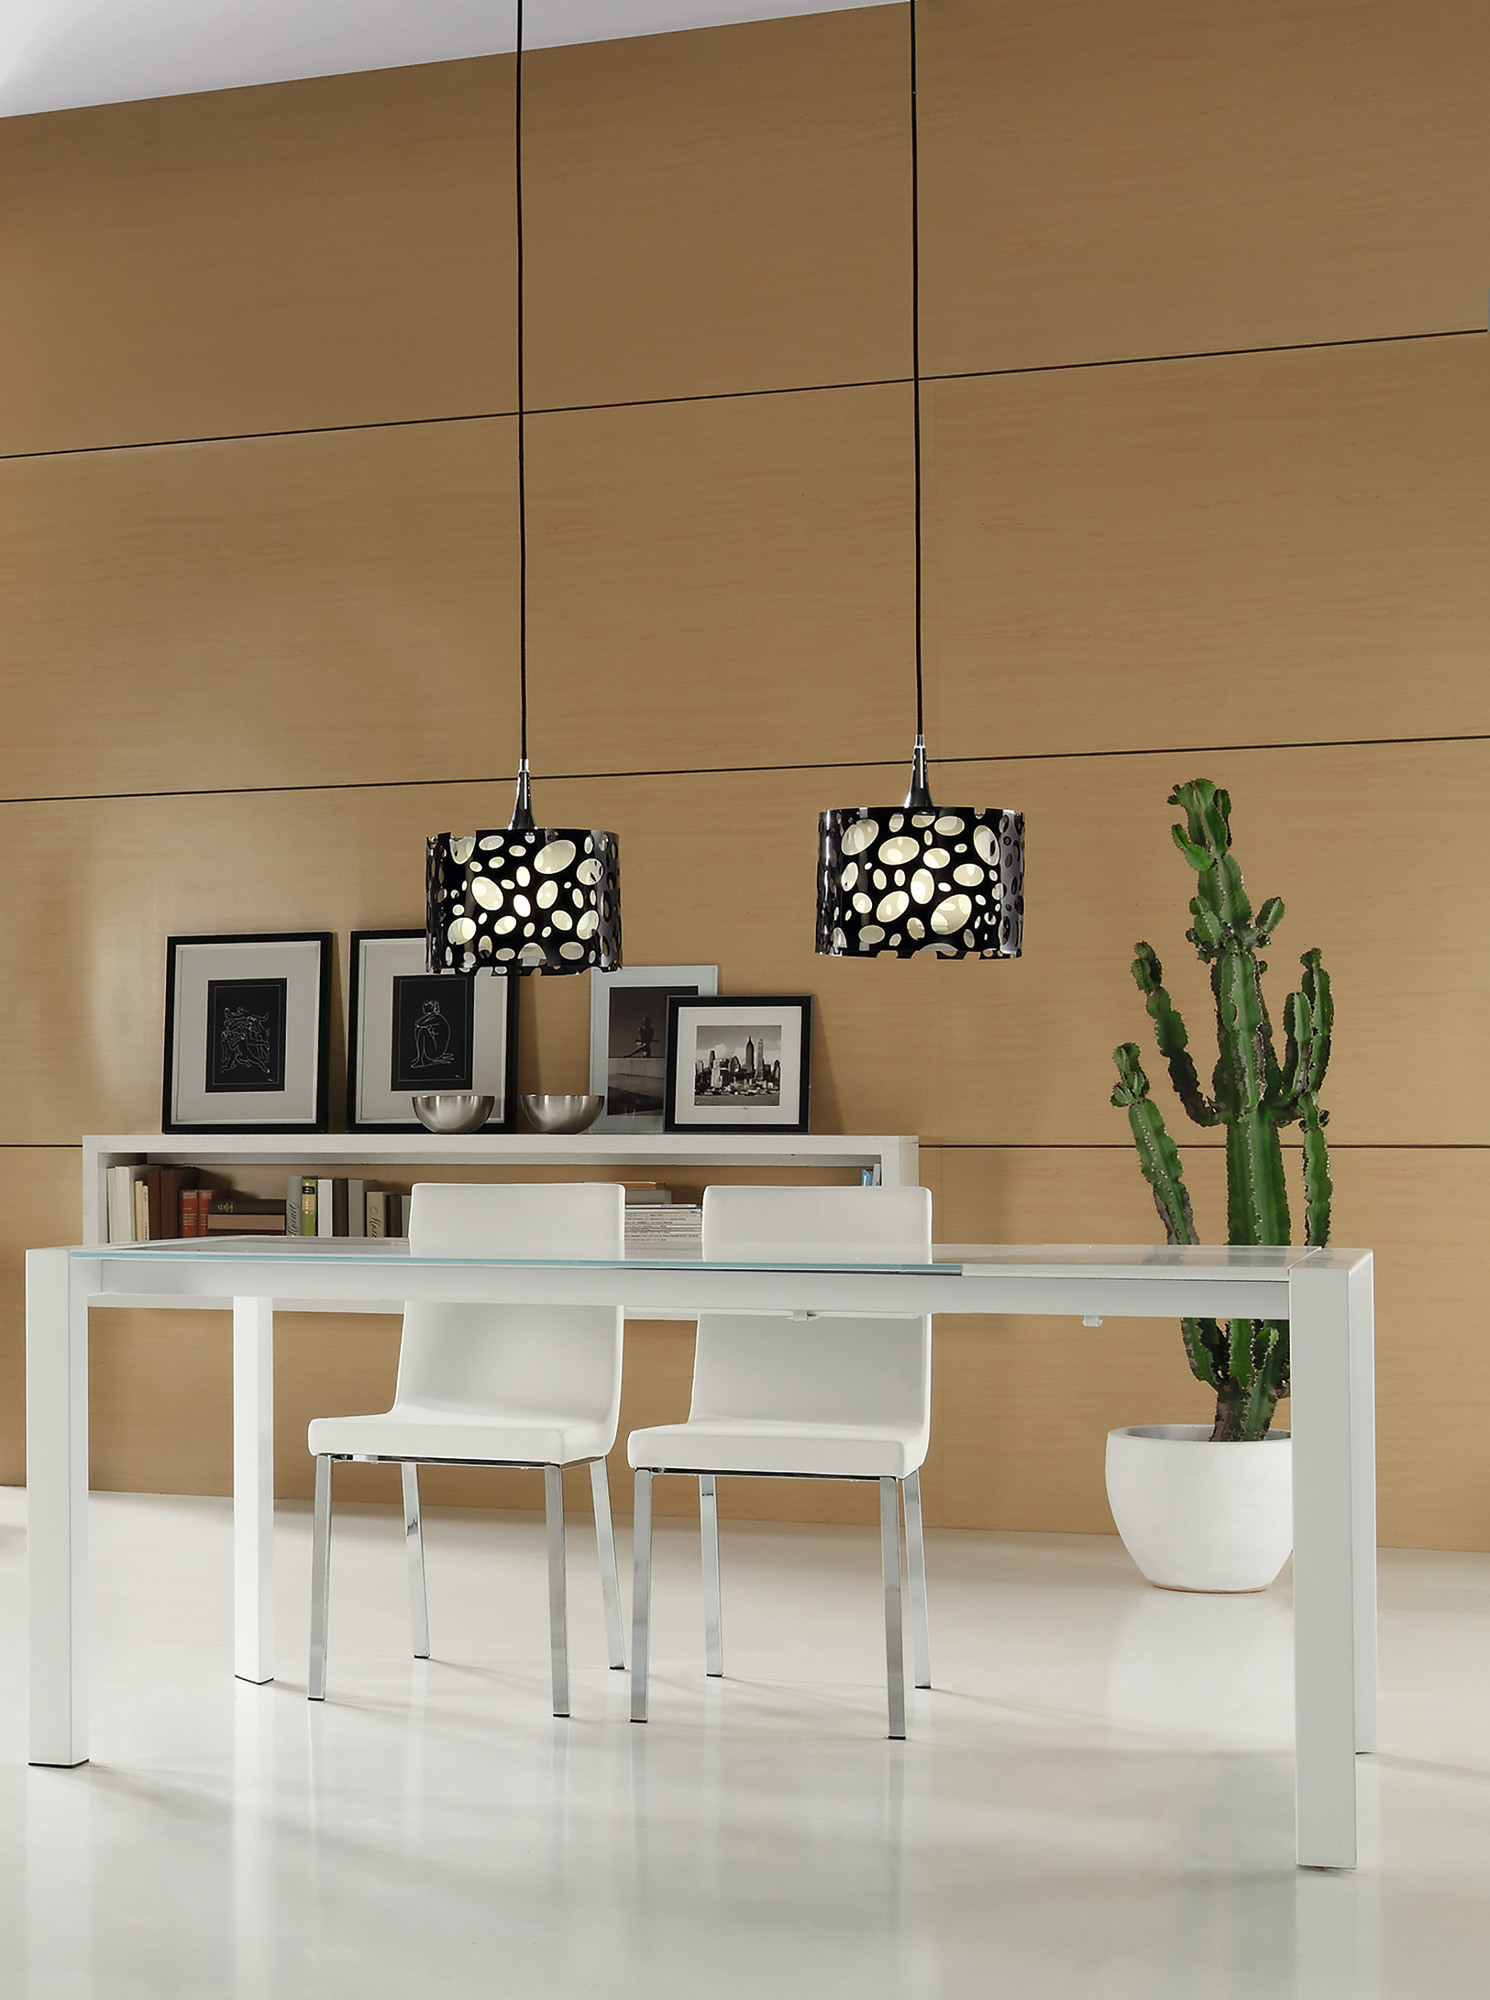 Lupin Floor Lamps Mantra Shaded Floor Lamps